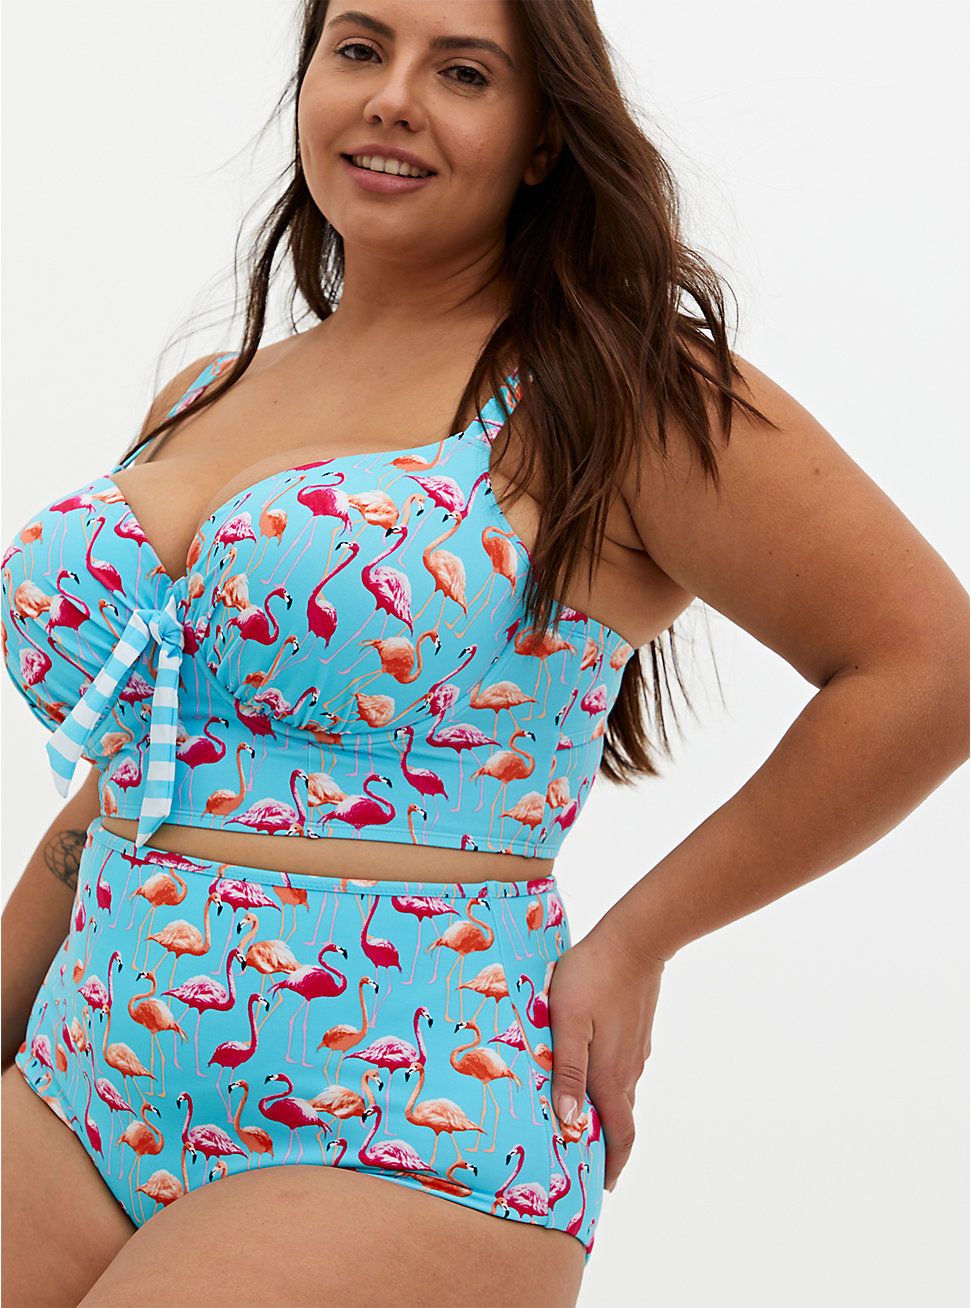 20 Best Swimsuits for Big Busts 2021 